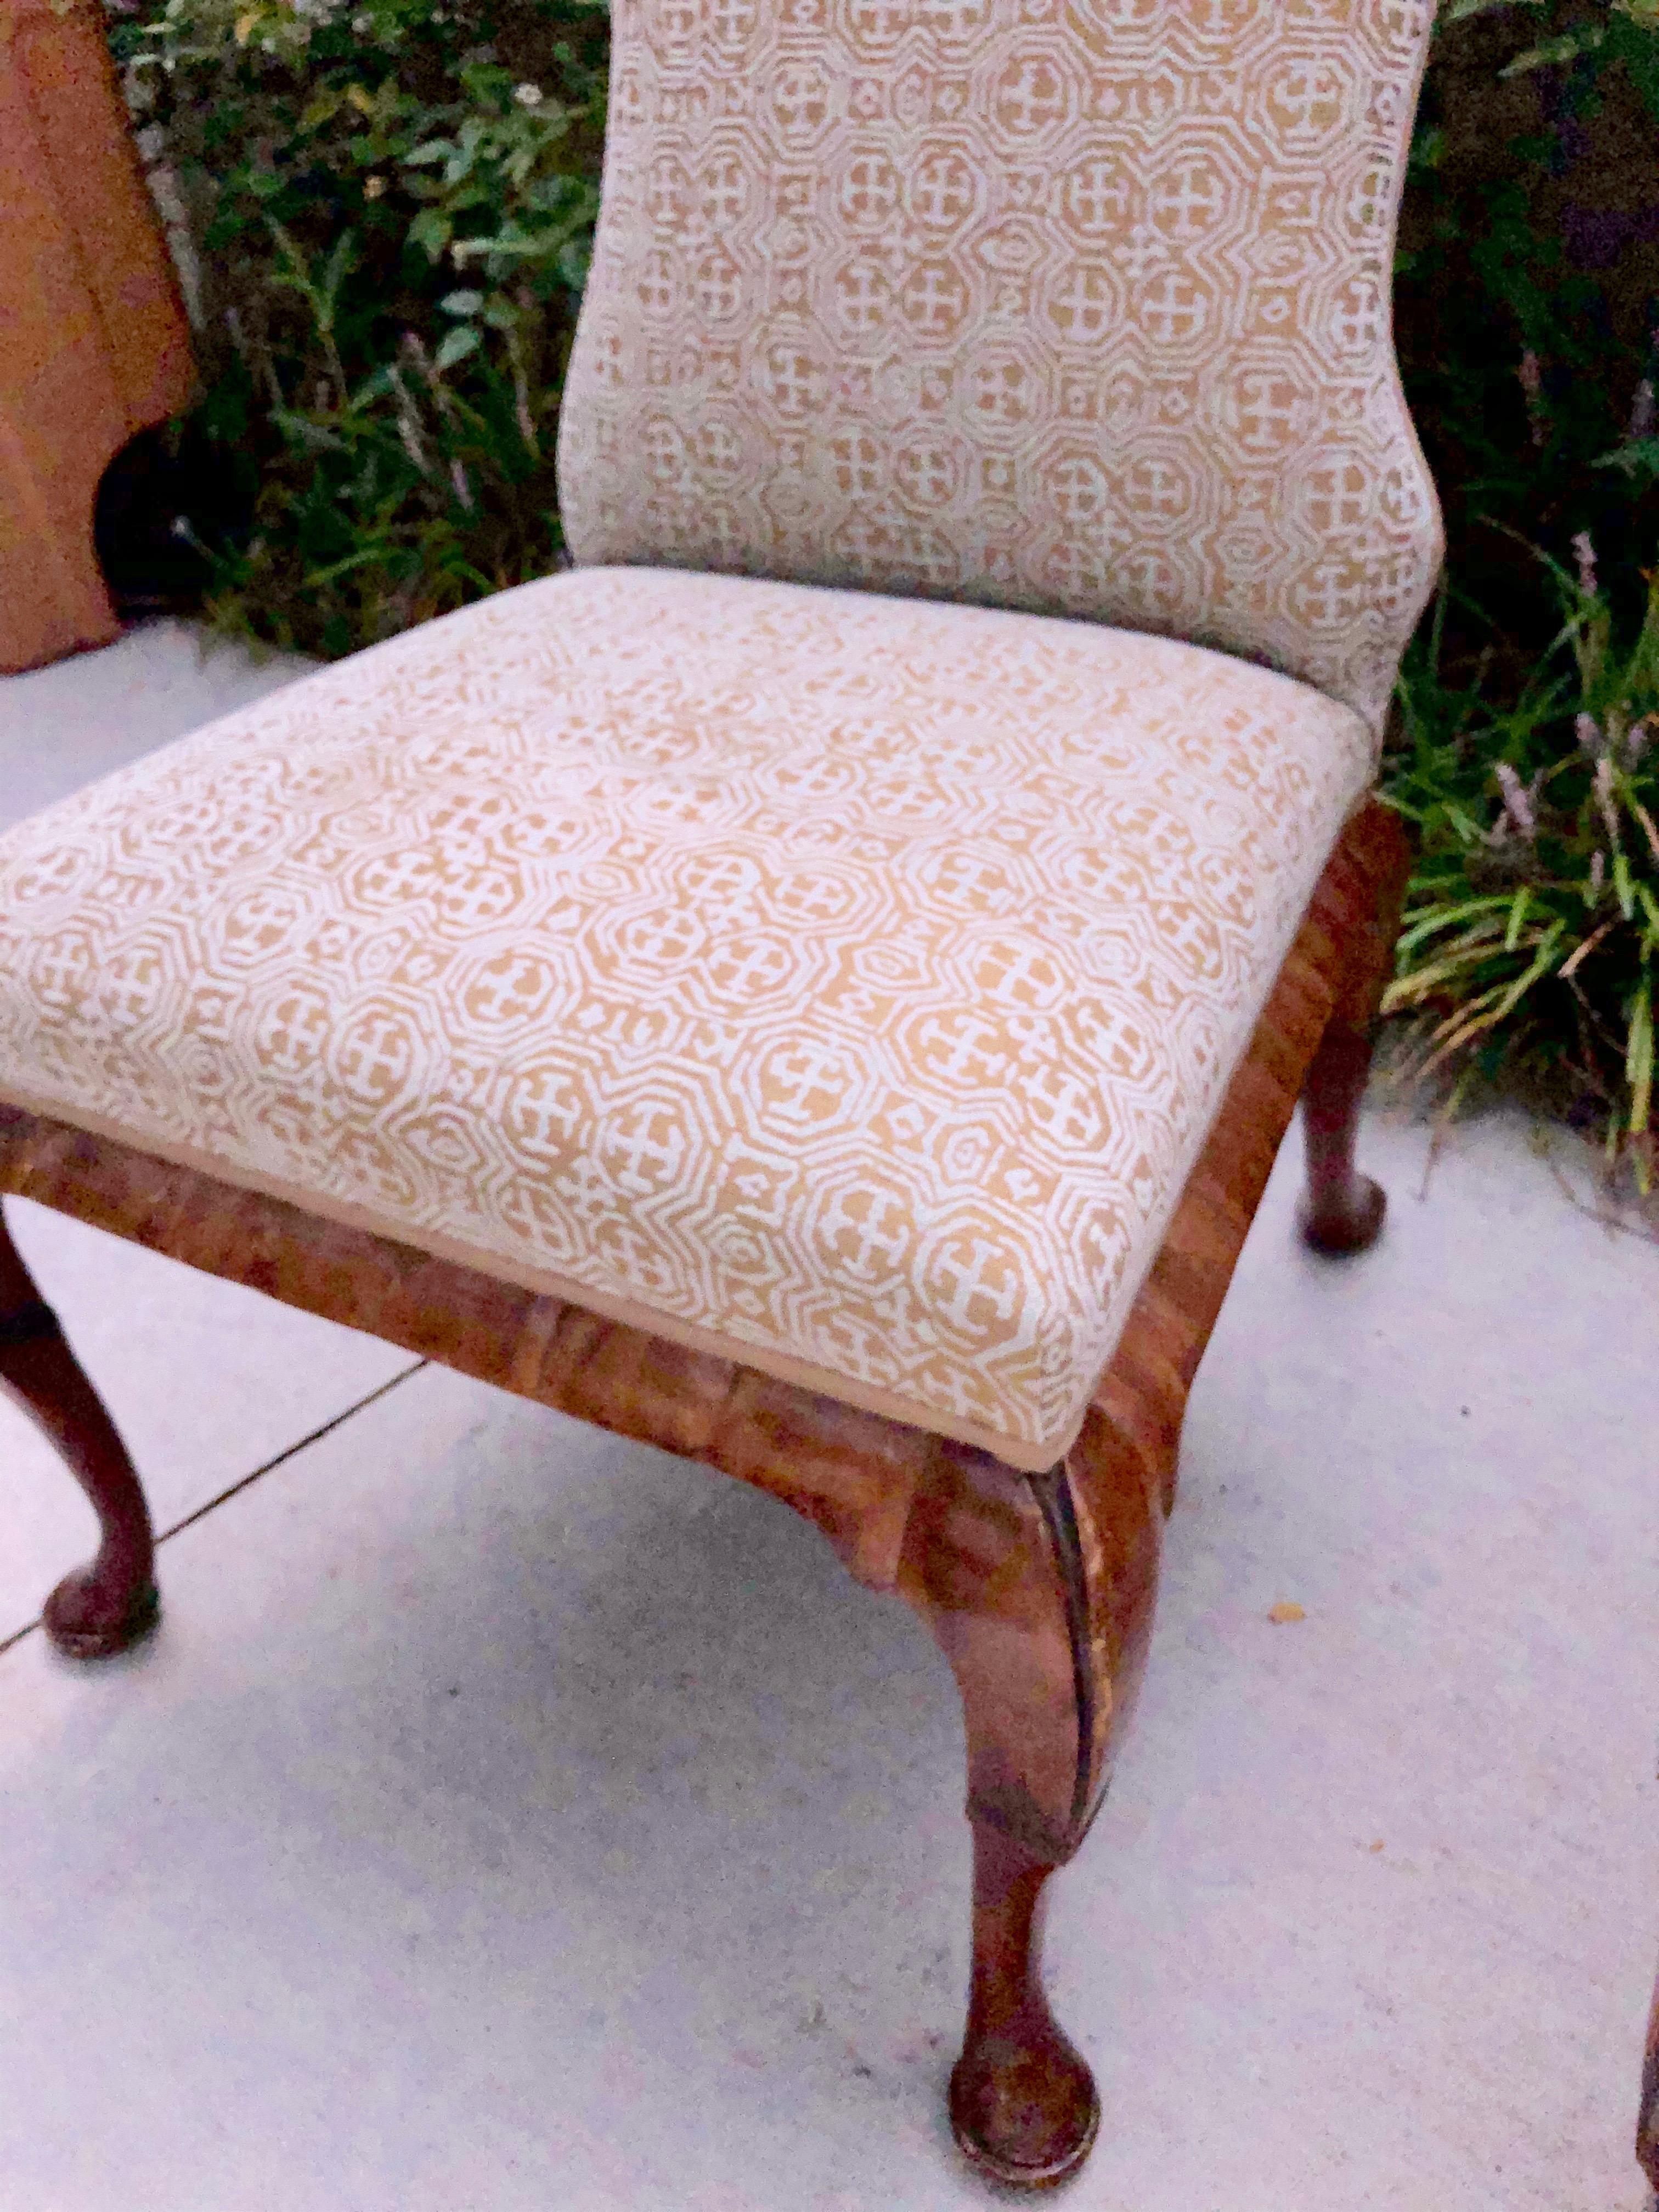 Pair of Queen Anne Dennis and Leen chairs - a lovely pair, perfect for the dining room or den as extra seating.